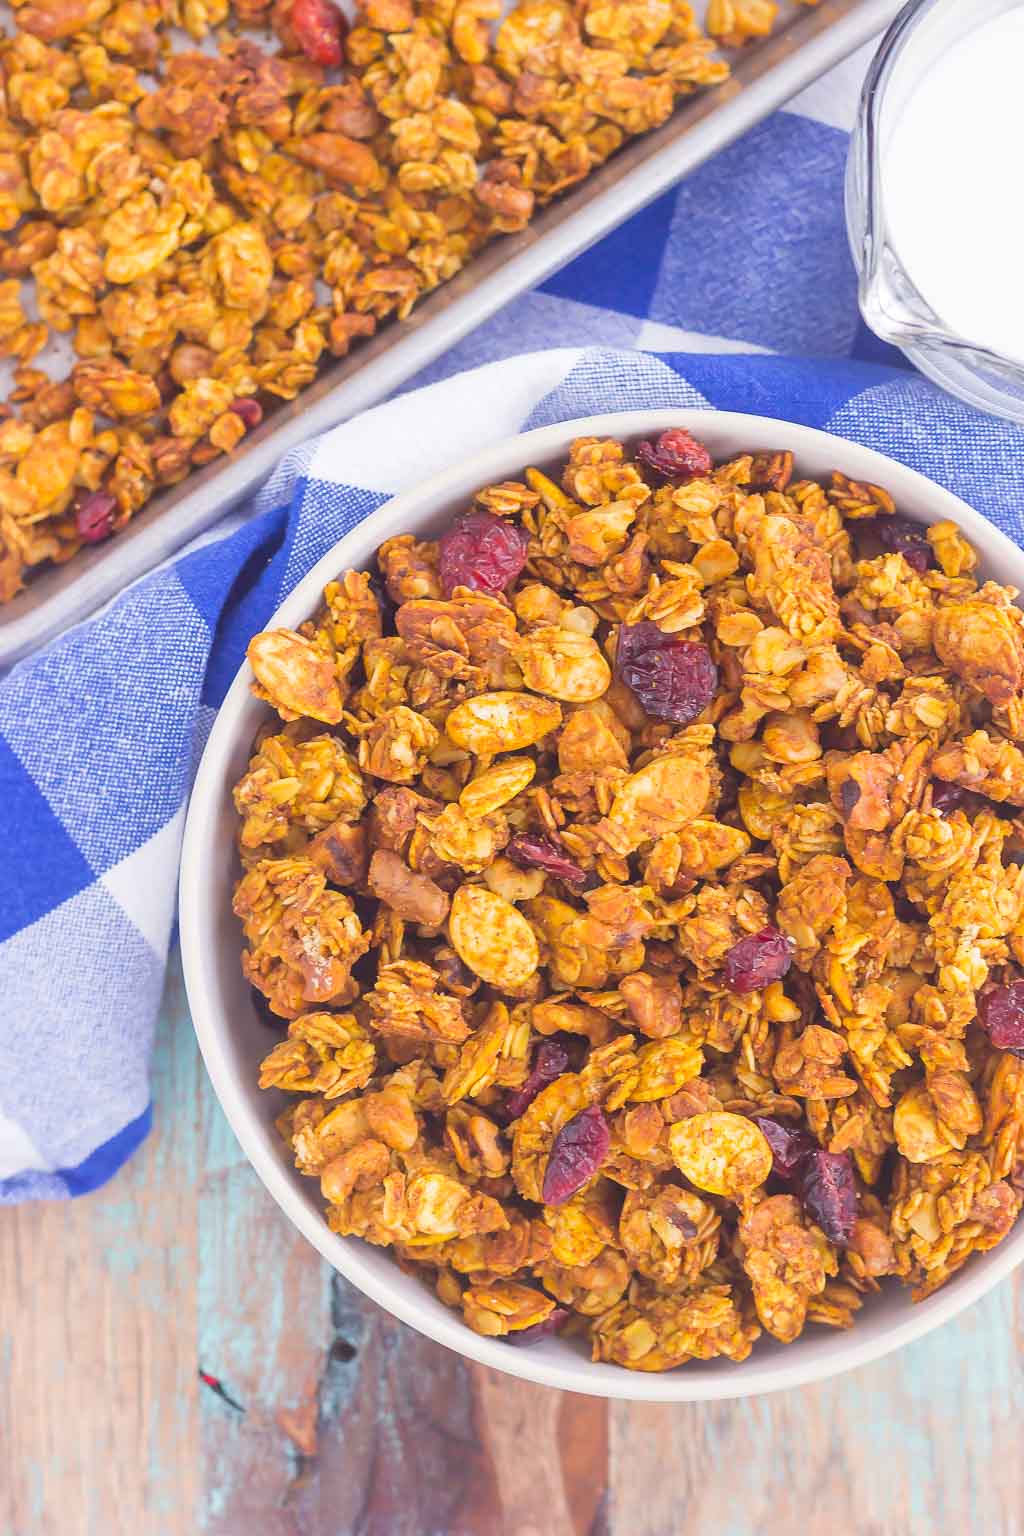 This Pumpkin Spice Granola is a delicious way to savor the flavors of fall. Hearty oats, crunchy walnuts, dried cranberries and fall spices give this granola both texture and flavor. It's simple to make and perfect to eat by the handful, with milk, or on top of yogurt or ice cream! #granola #pumpkingranola #homemadegranola #pumpkinbreakfast #pumpkinsnack #healthygranola